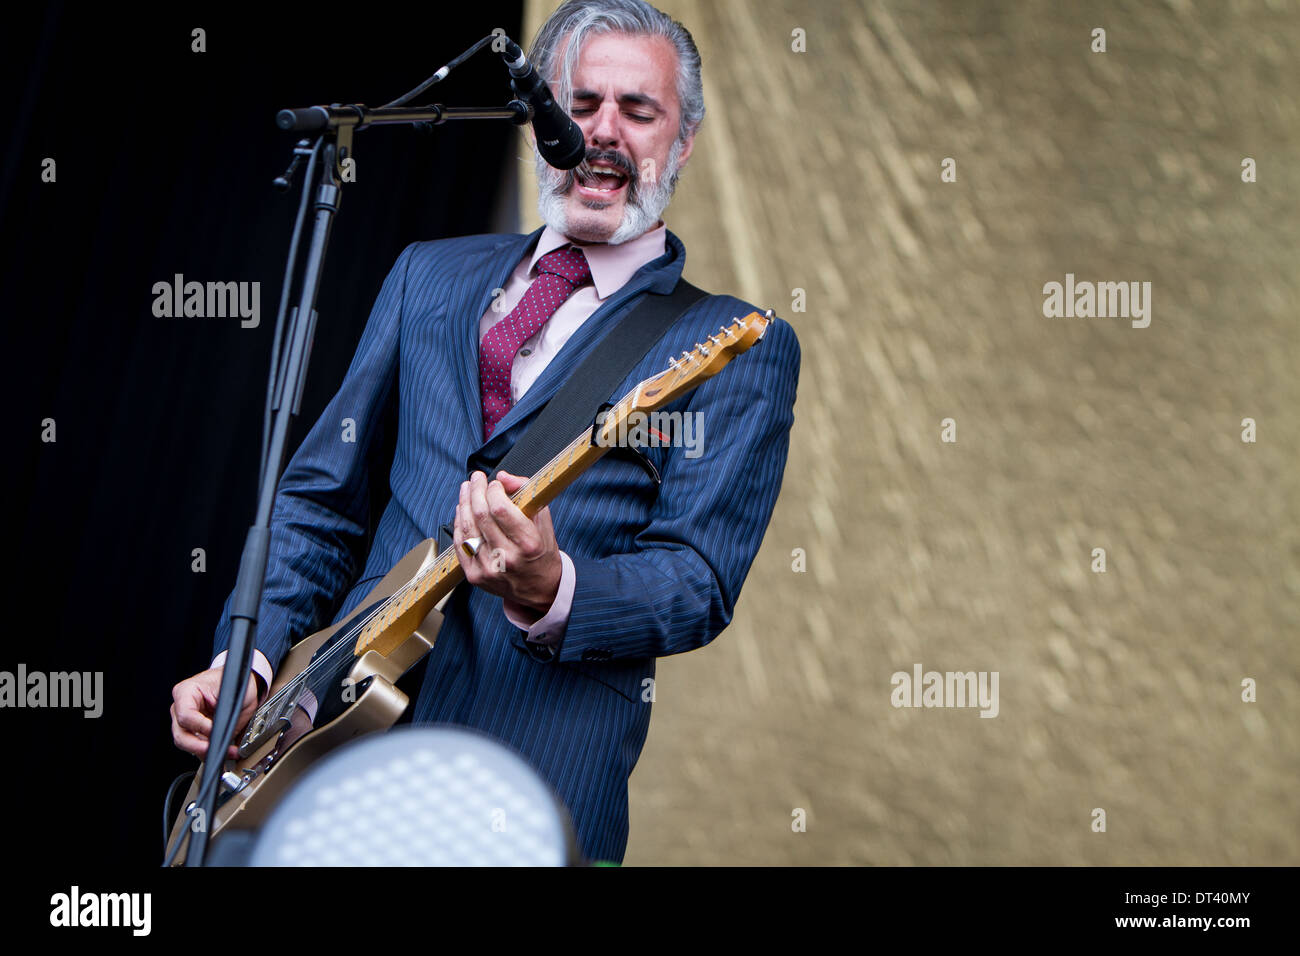 Rho Milan Italy. 04th June 2012. The Belgian rock band TRIGGERFINGER performs live at Arena Fiera di Milano Stock Photo